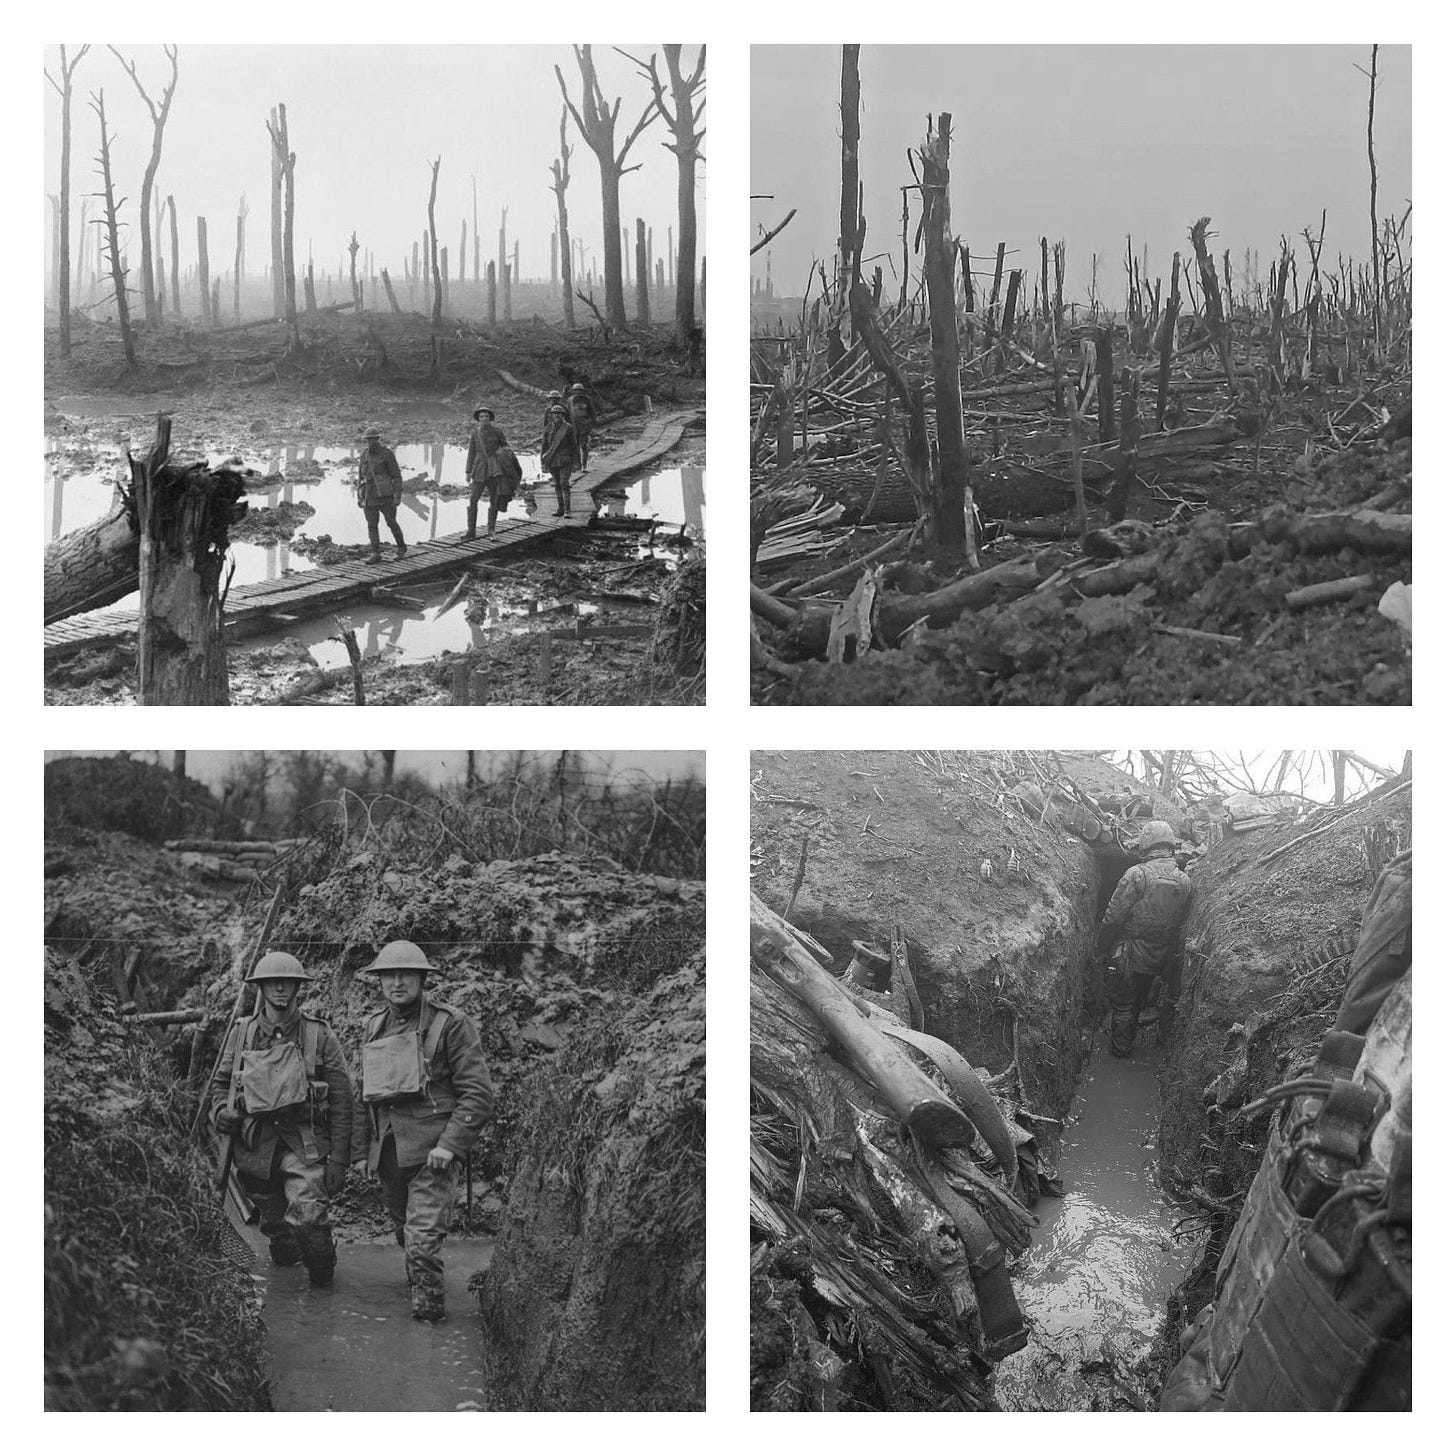 Welcome to Bakhmut: the new Passchendaele